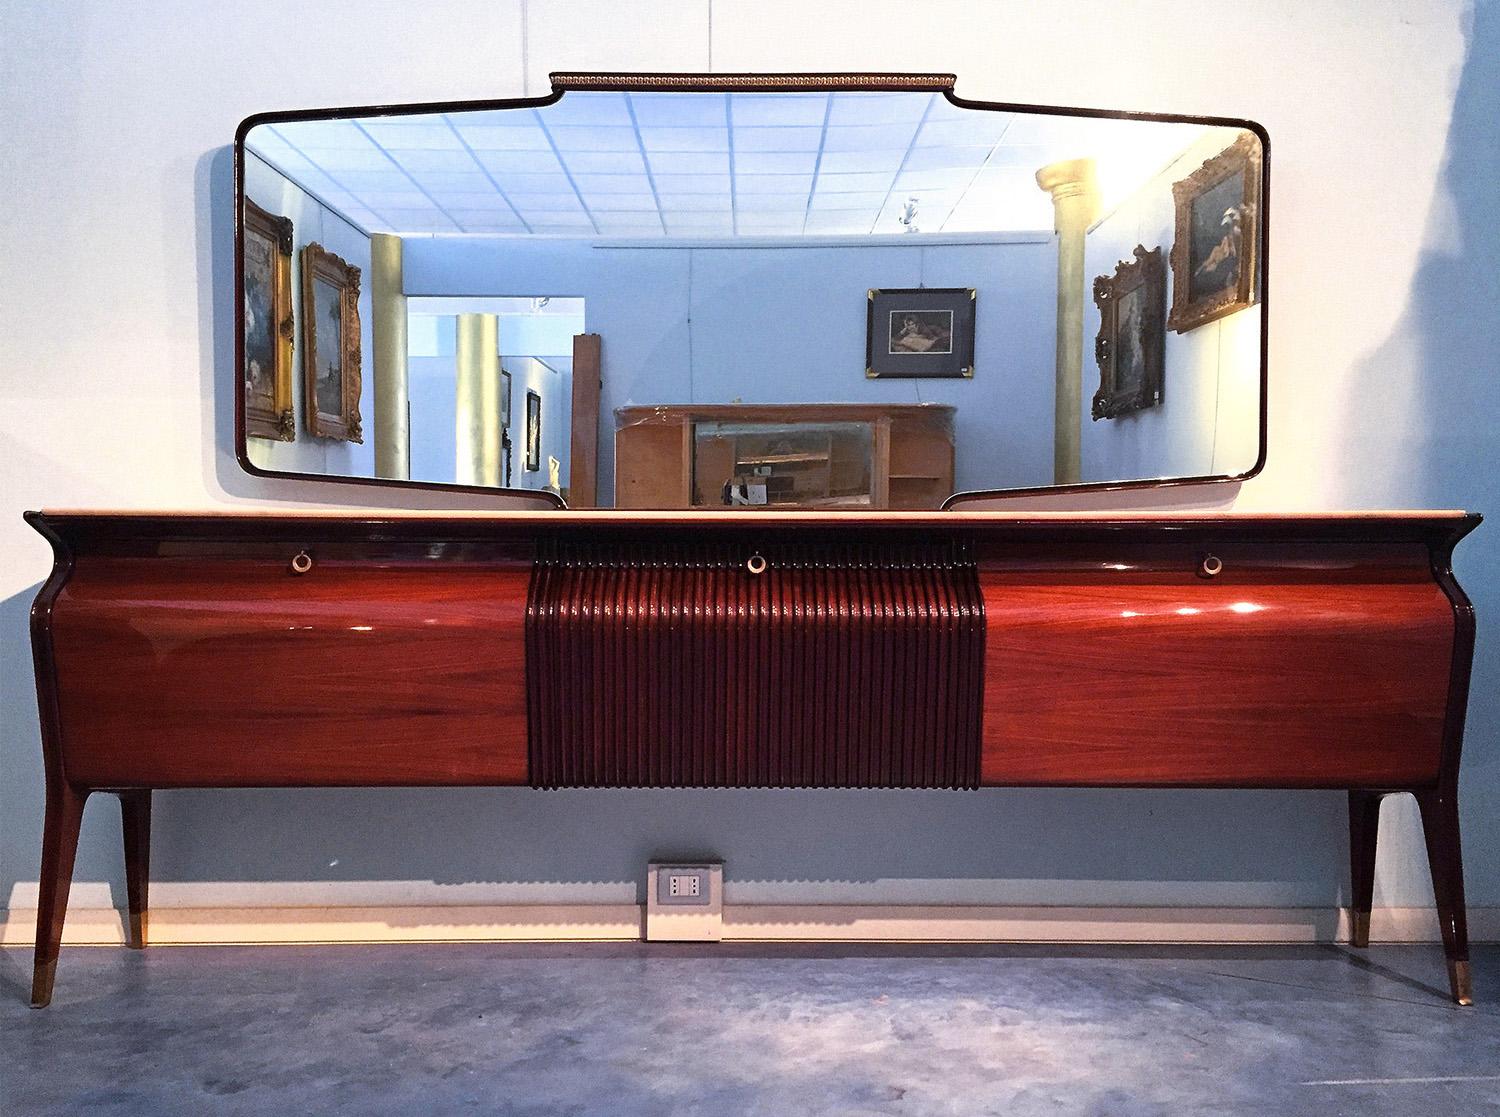 Spectacular and stylish sideboard or credenza designed by Osvaldo Borsani in the 1952.
The structure is made in rosewood with a unique design, characterized by its amazing curved profile very detailed and surmounted, on the marble top panel, by